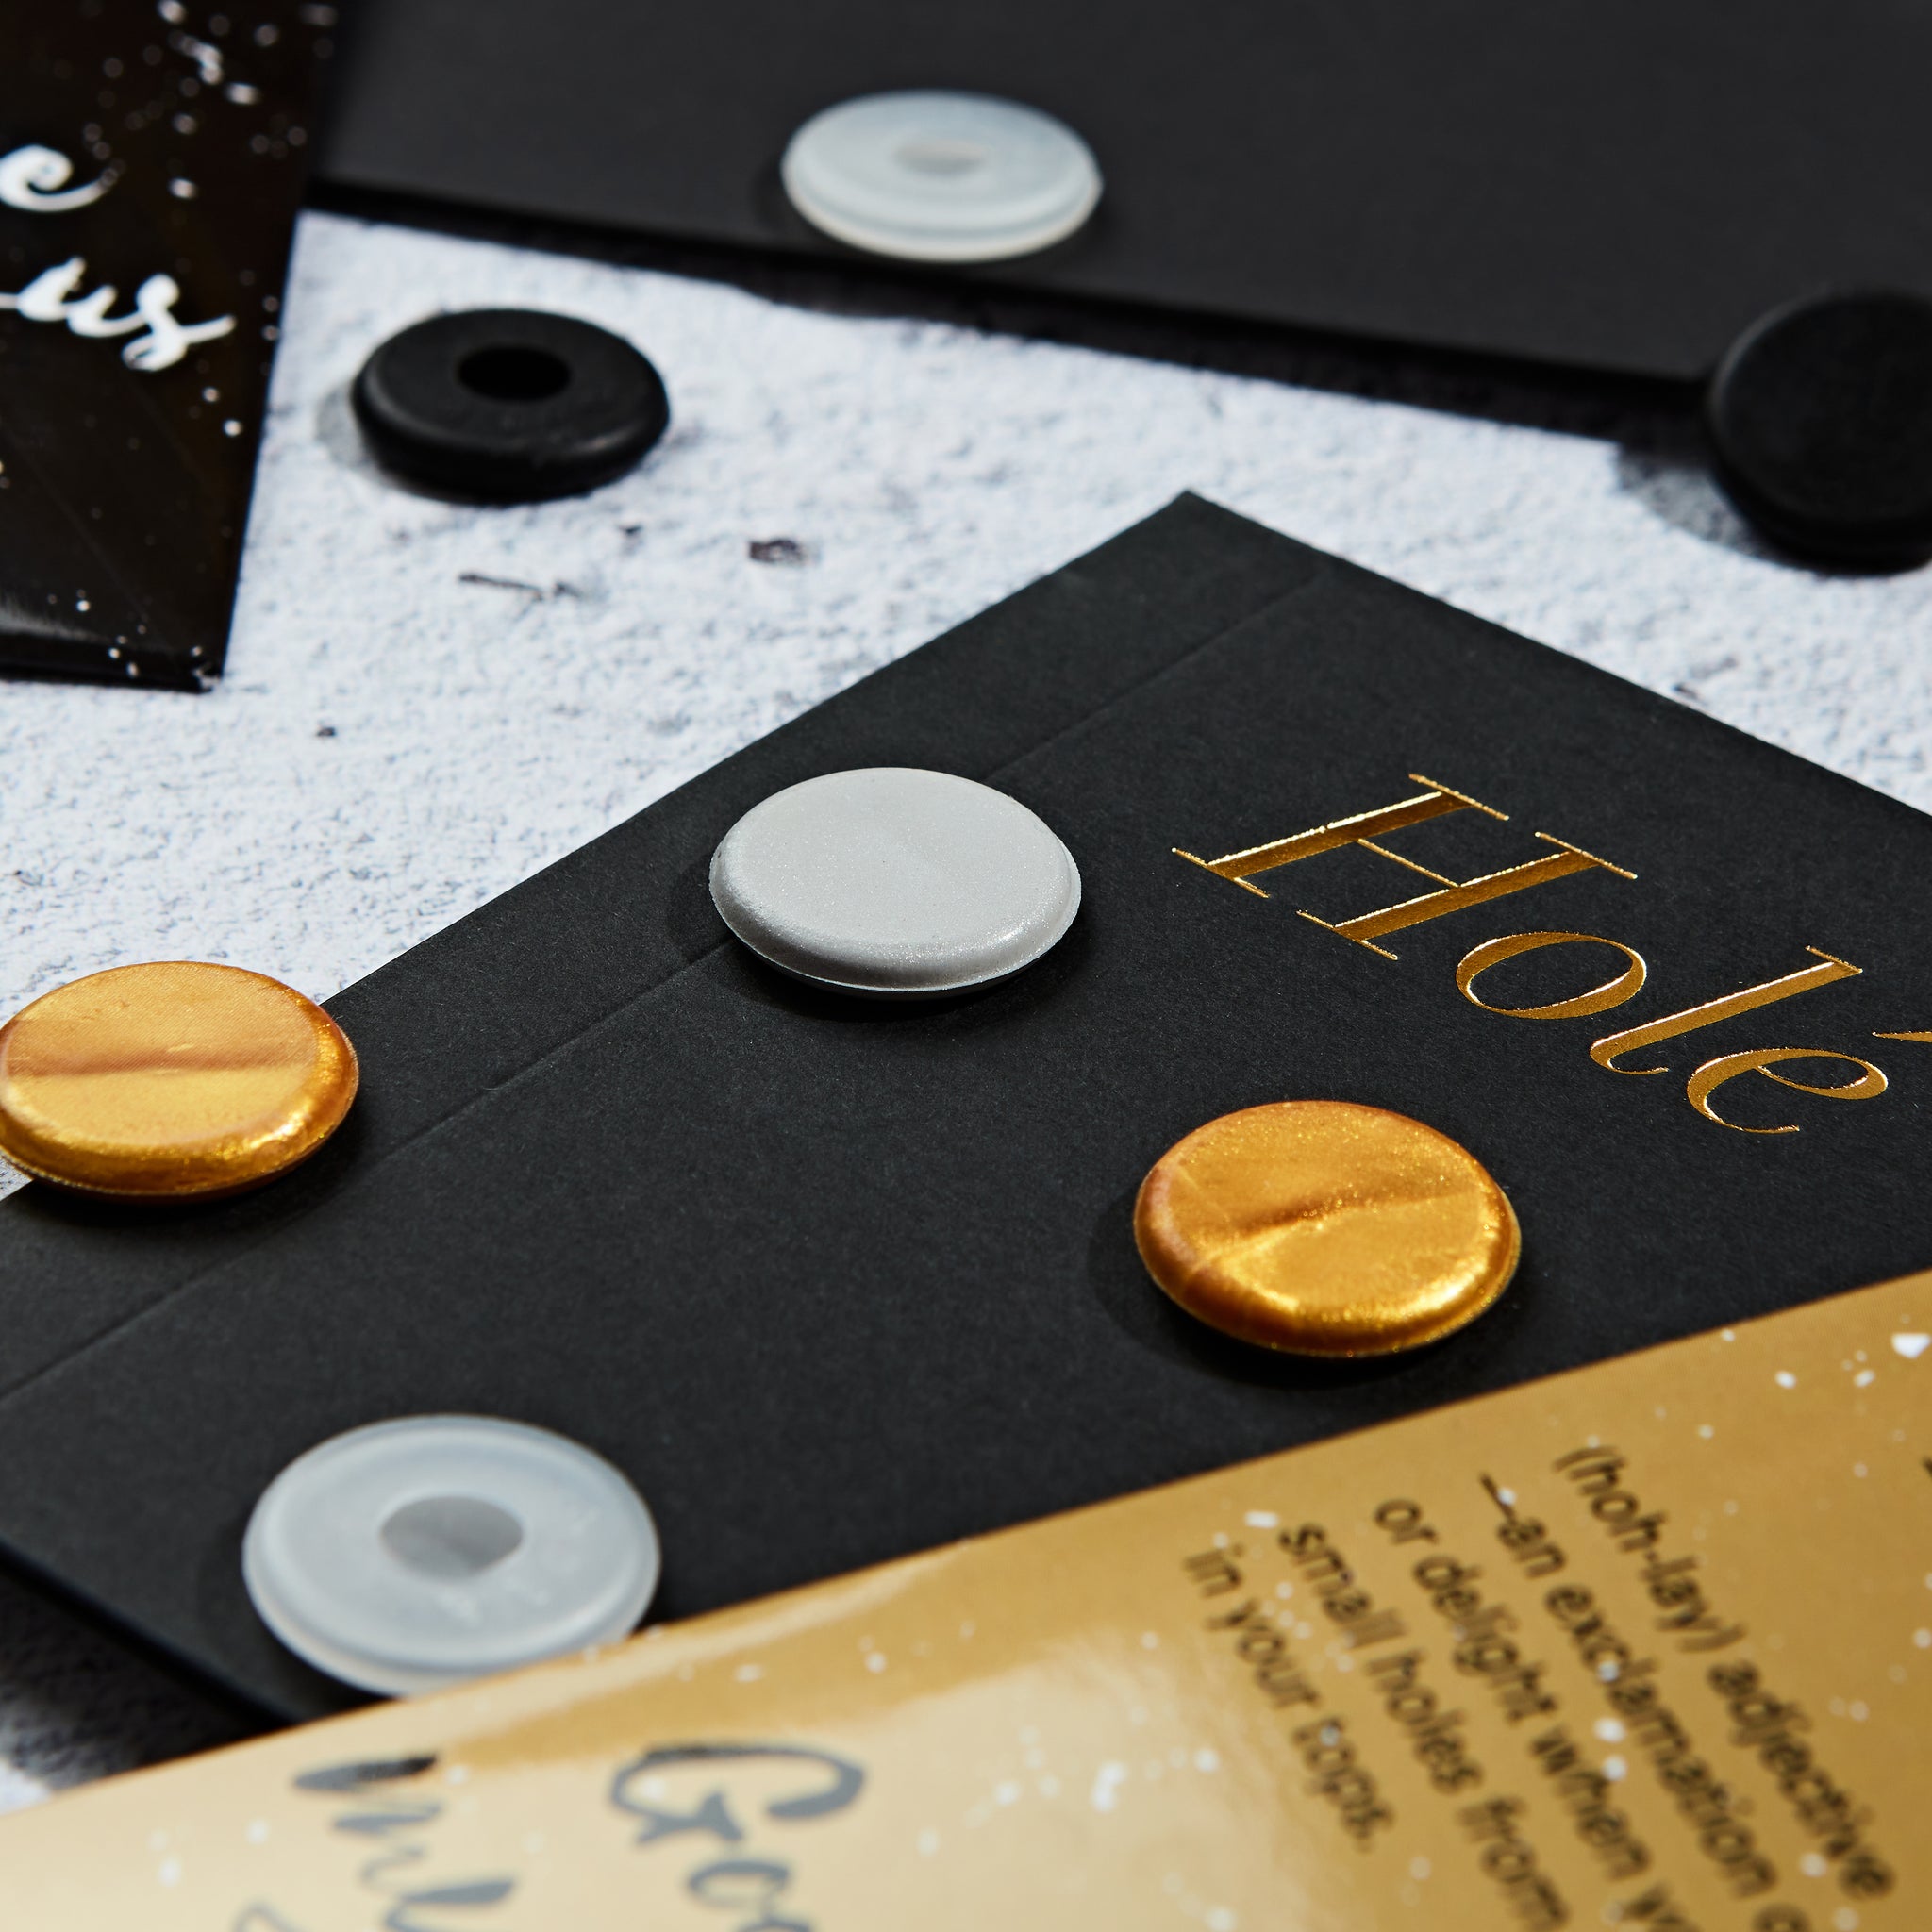 Holé Launches Brand New Metallic Range Of Button Covers